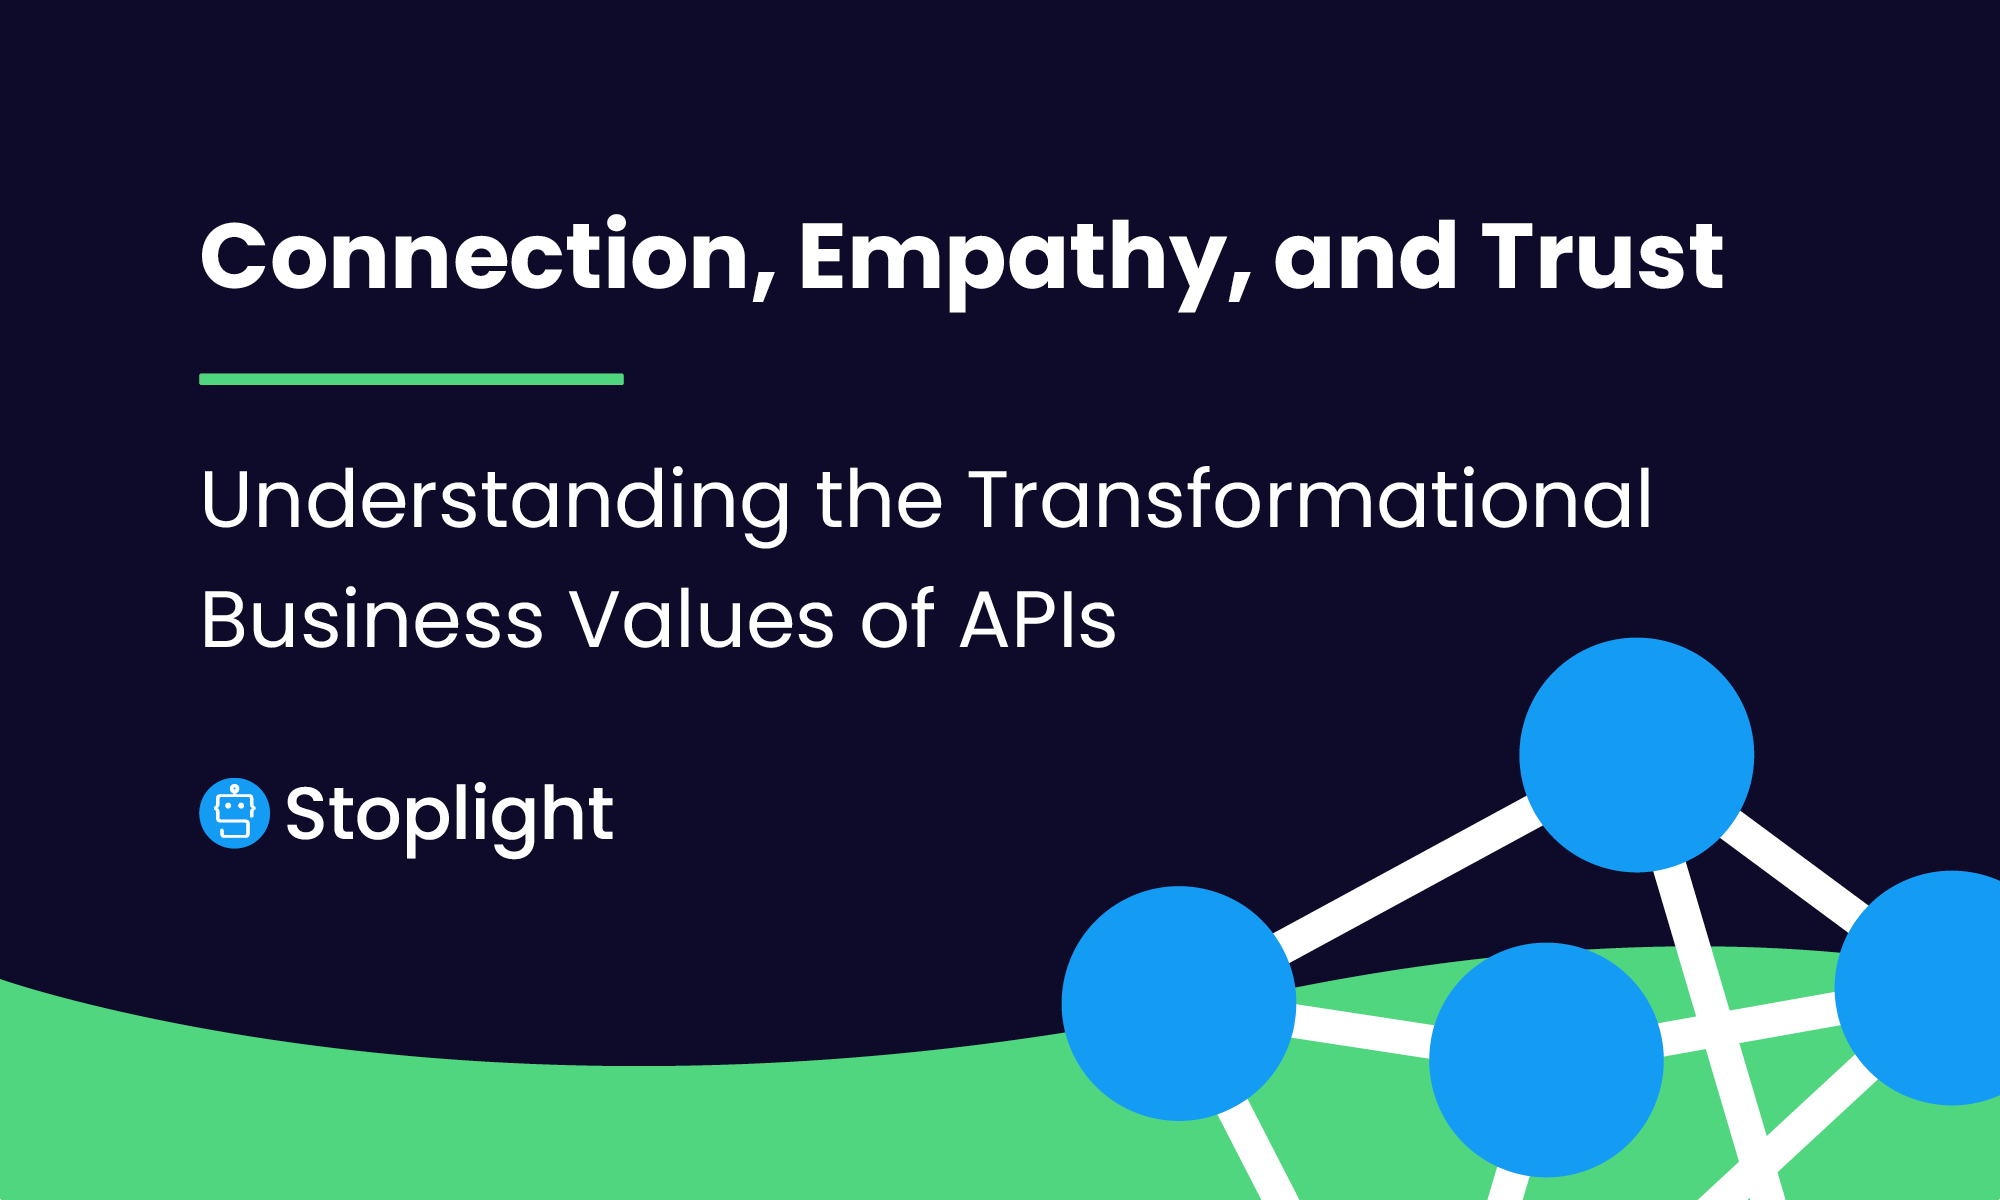 Connection, Empathy, & Trust: Understanding the Business Value of APIs